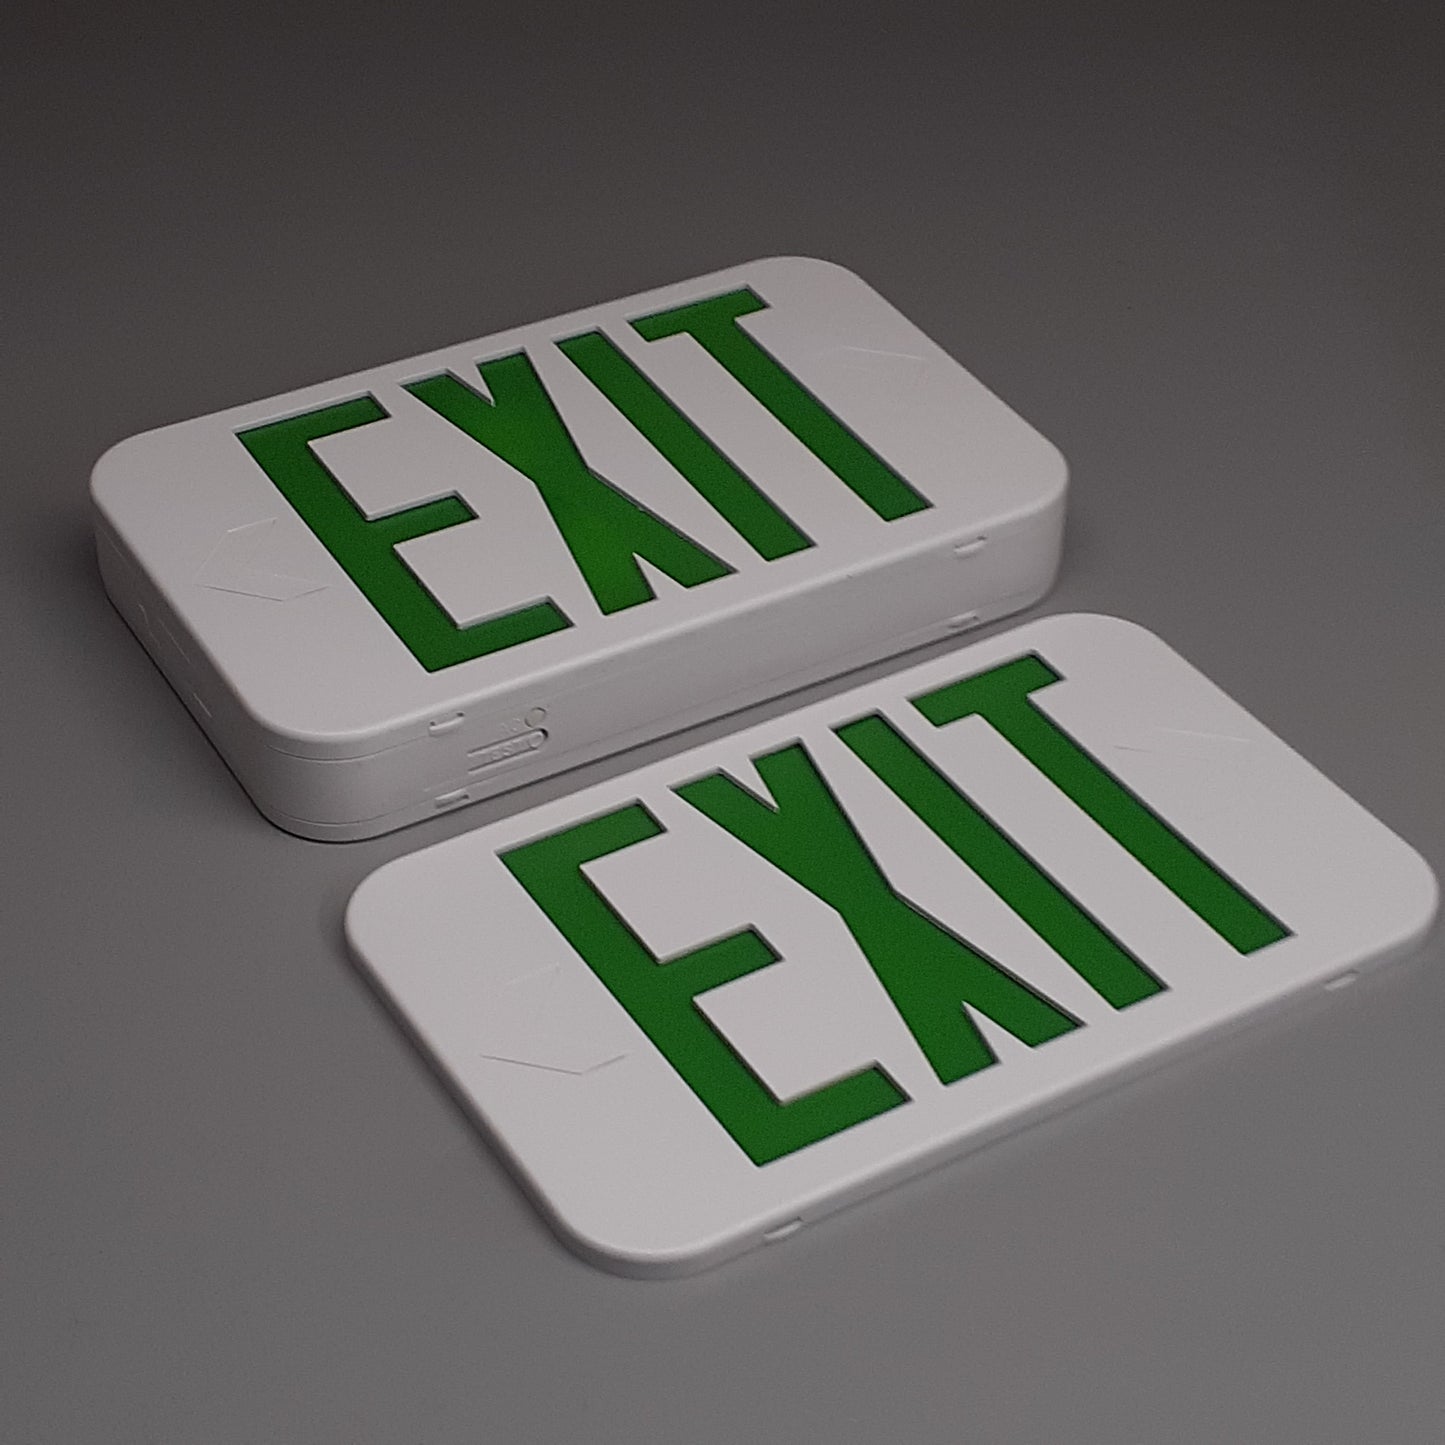 HUBBELL Illuminated Exit Signs - Emergency / Exit Sign, LED Series CE (New)